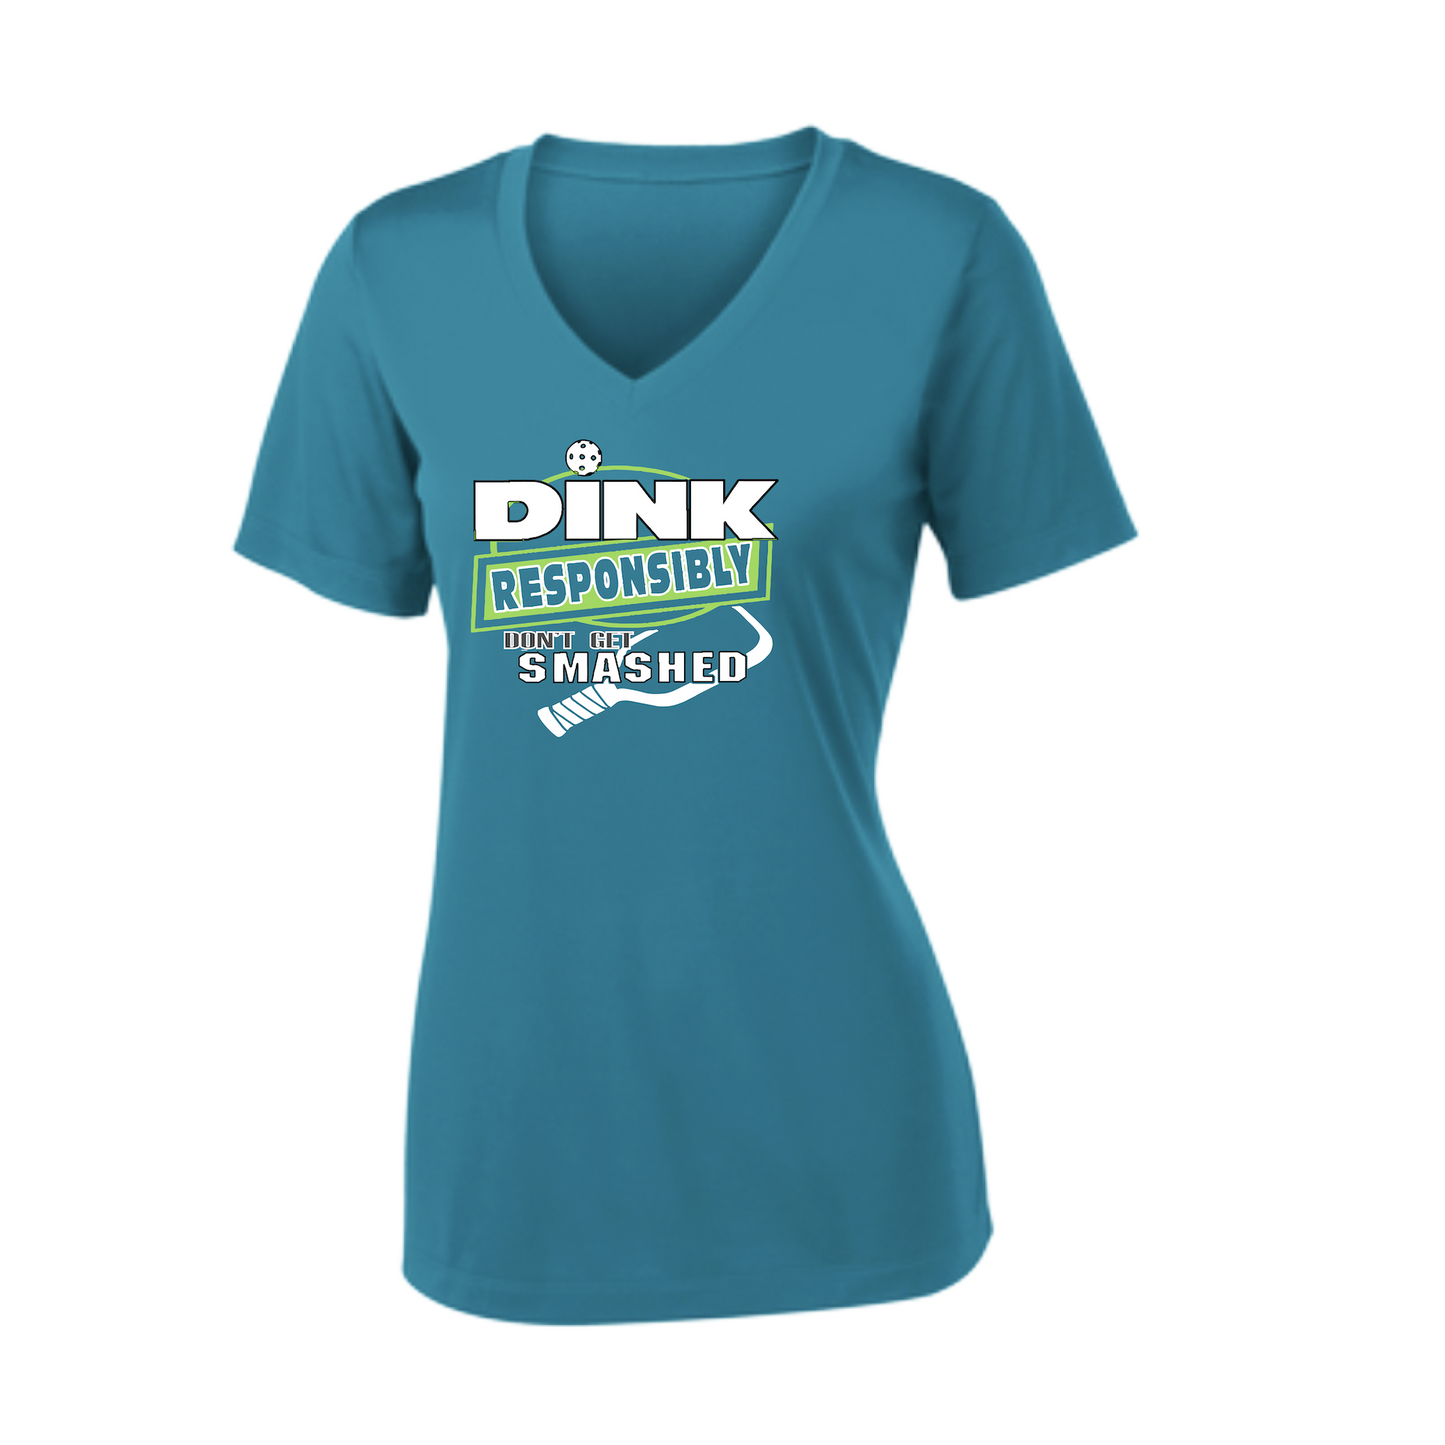 Pickleball Design: Dink Responsibly - Don't Get Smashed  Women's Style:  Short Sleeve V-Neck  Turn up the volume in this Women's shirt with its perfect mix of softness and attitude. Material is ultra-comfortable with moisture wicking properties and tri-blend softness. PosiCharge technology locks in color. Highly breathable and lightweight.